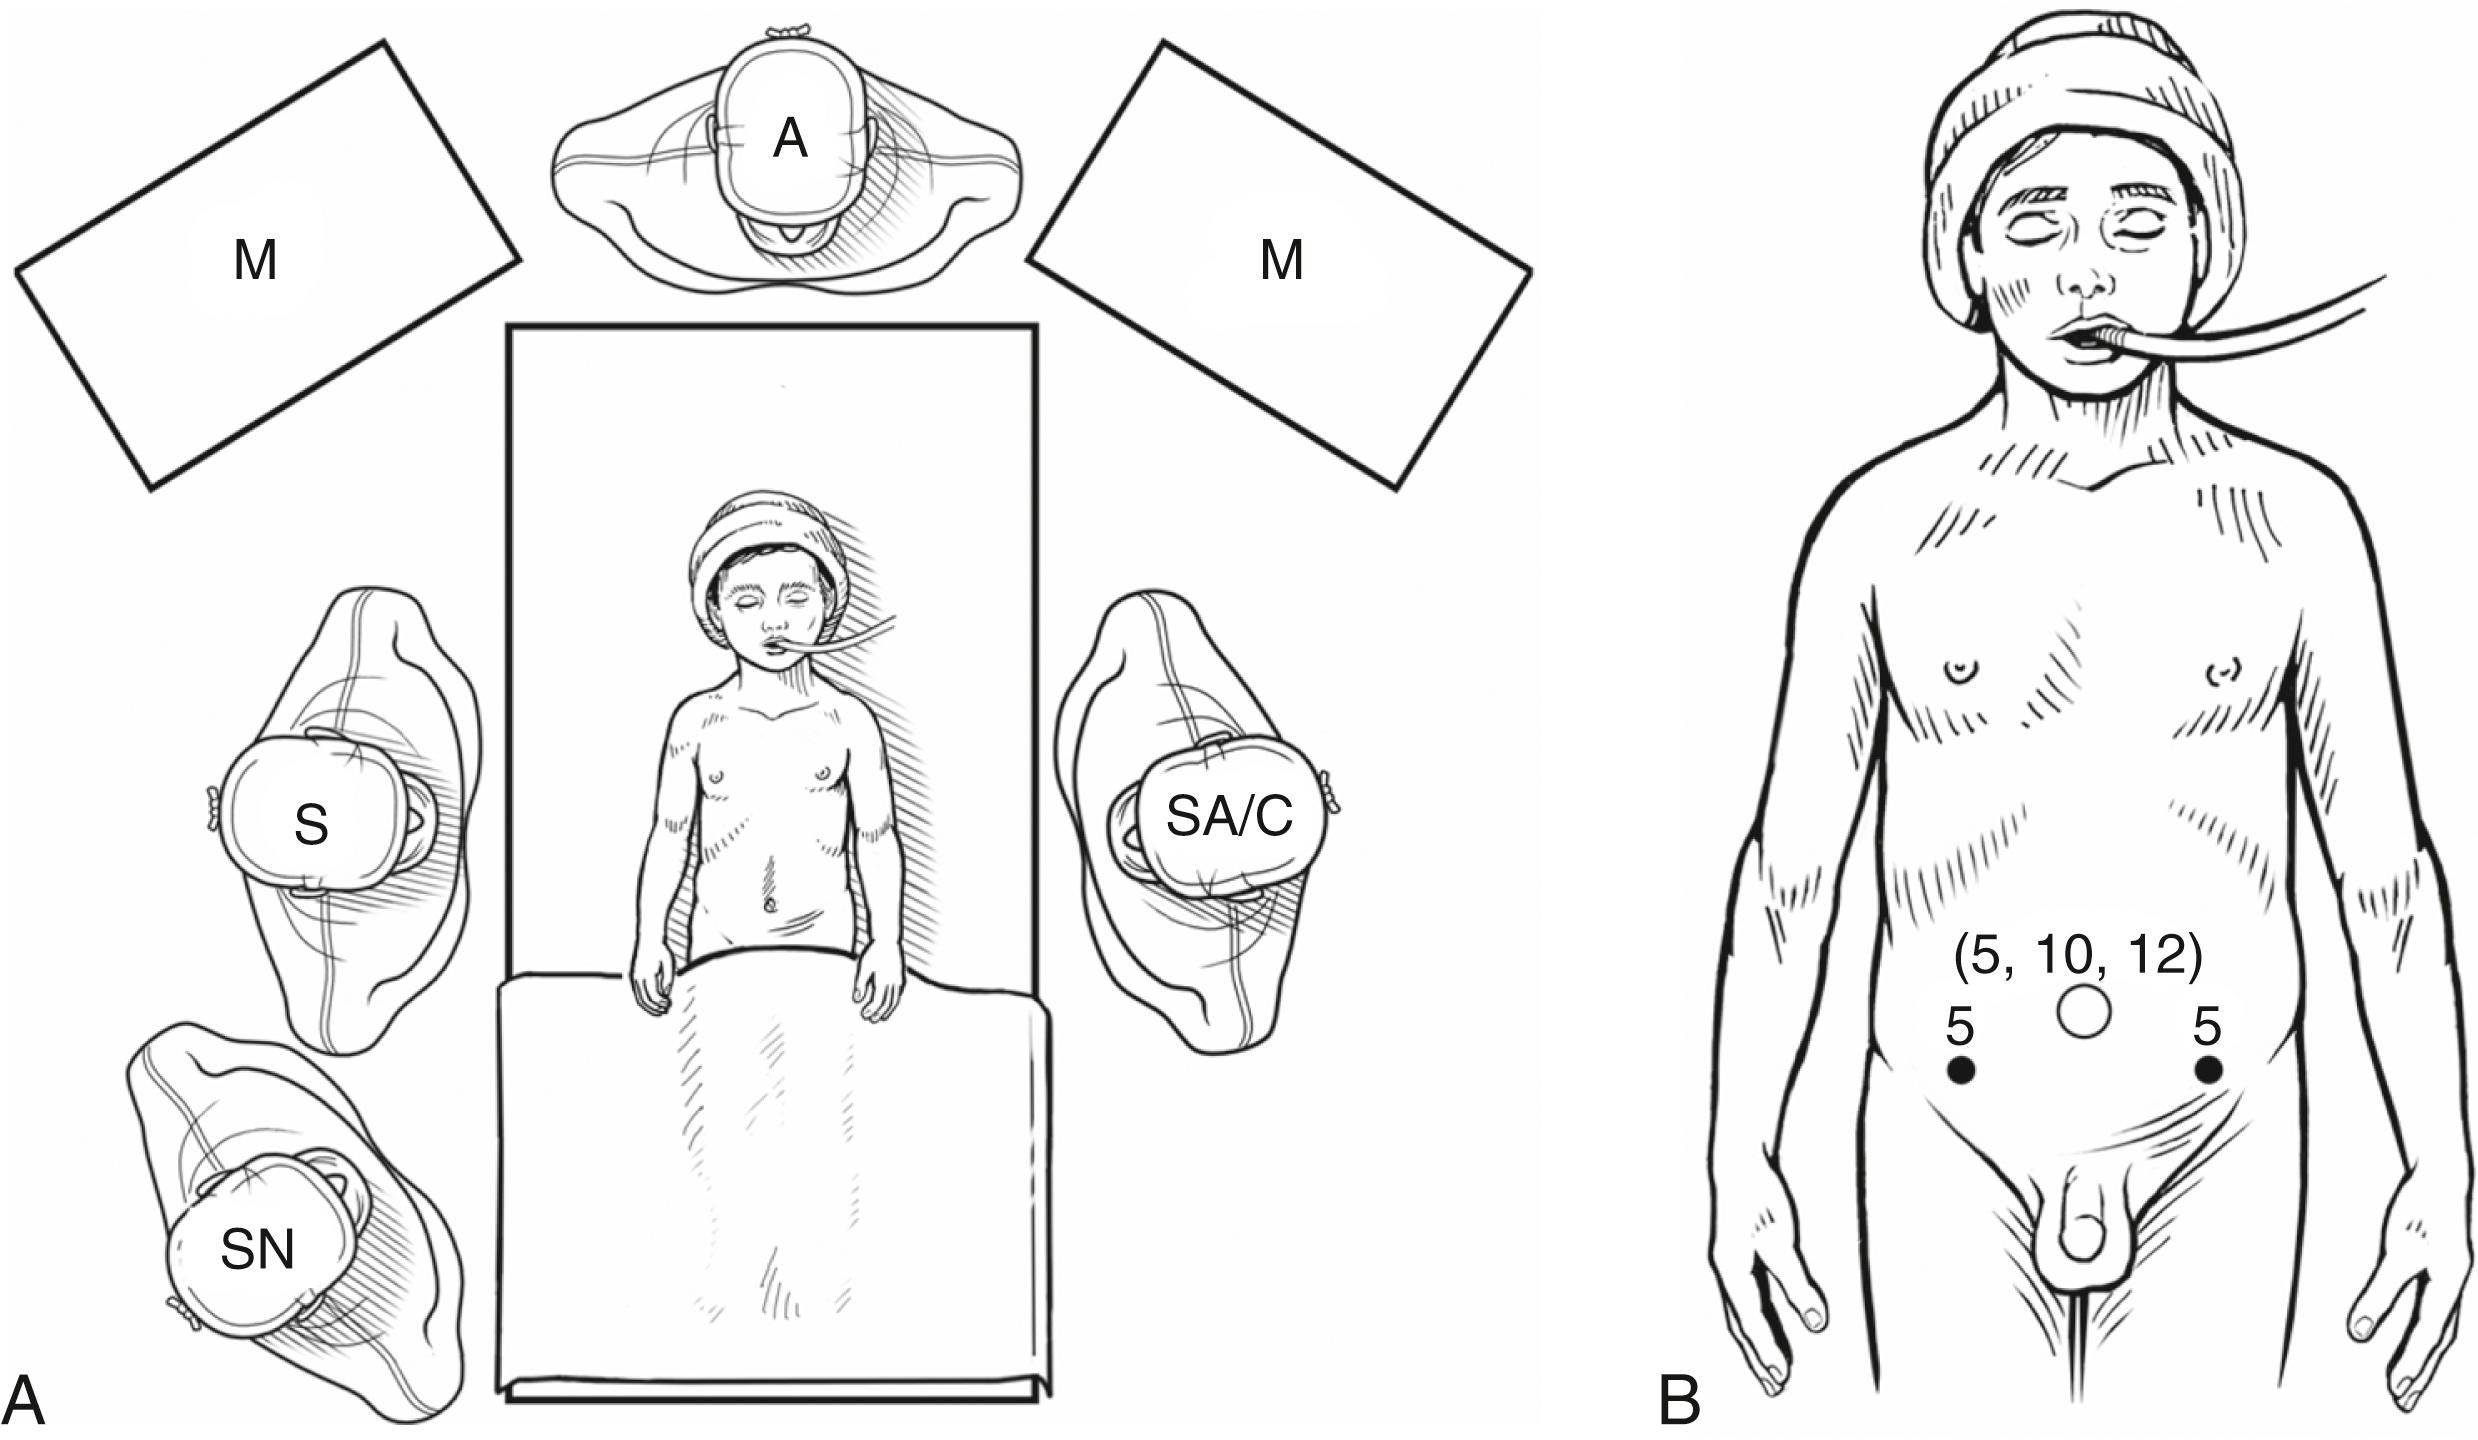 Fig. 7-4, A, Personnel placement for a laparoscopic Ladd procedure for a larger patient is shown. The child is placed supine on the operating table. The surgeon (S) usually stands to the patient’s right and the surgical assistant/camera holder (SA/C) is usually positioned opposite the surgeon. The scrub nurse (SN) is positioned to the surgeon’s right. For older patients, the lithotomy position may be preferred. In this situation, the surgeon is usually positioned between the patient’s legs. A, anesthesiologist; M, monitor. B, Port placement for a laparoscopic Ladd procedure. A 5- or 10- to 12-mm umbilical port is selected based on the patient’s size and intentions to perform a transumbilical appendectomy. Two 3- or 5-mm instruments are introduced through the anterior abdominal wall to triangulate the operative field. These incision sites are typically located in the right and left lower abdomen.